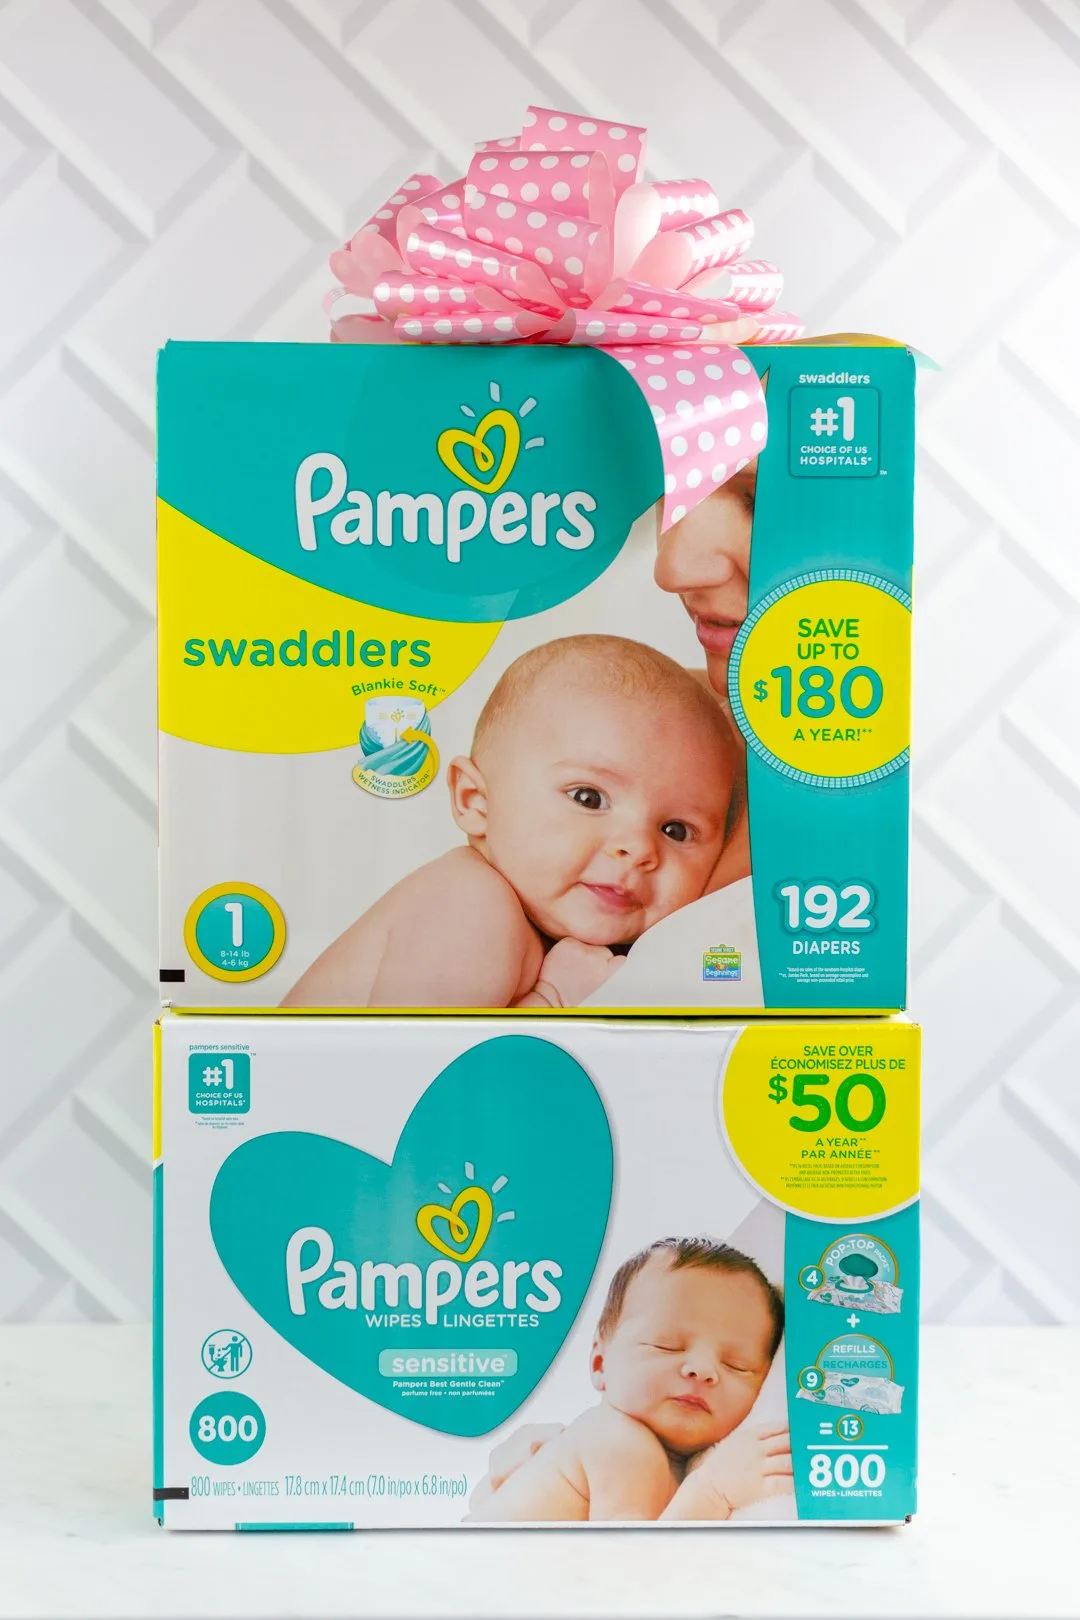 Pampers Swaddlers and Pampers Sensitive Wipes